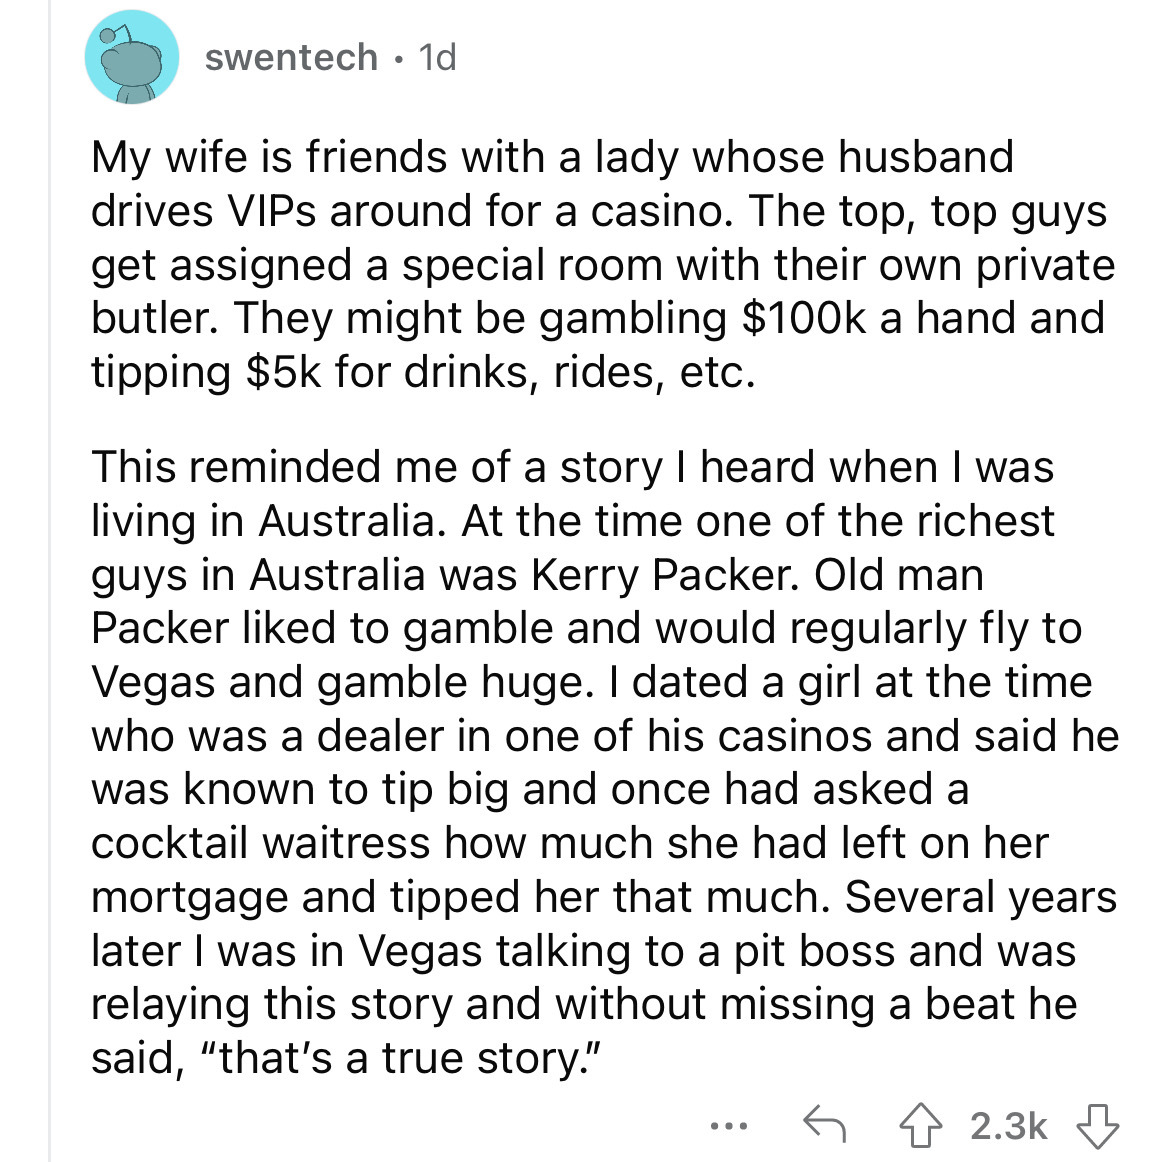 angle - swentech 1d My wife is friends with a lady whose husband drives VIPs around for a casino. The top, top guys get assigned a special room with their own private butler. They might be gambling $ a hand and tipping $5k for drinks, rides, etc. This rem